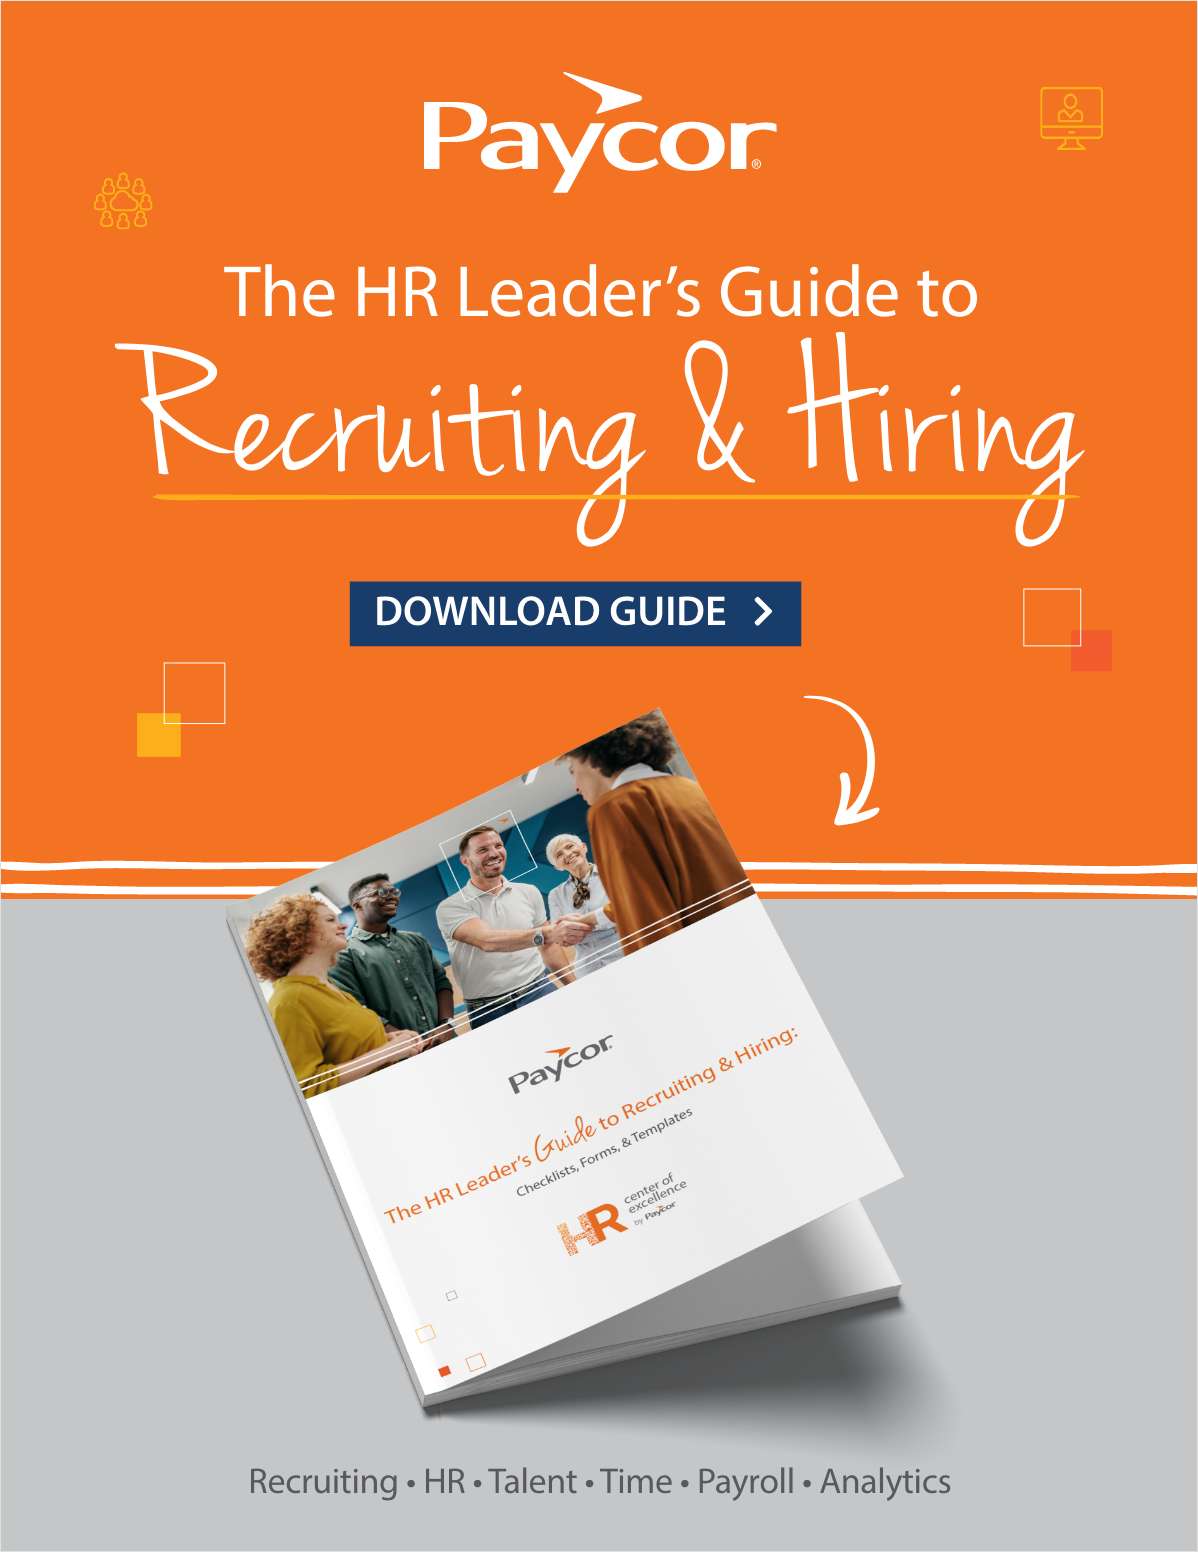 The HR Leader's Guide to Recruiting & Hiring